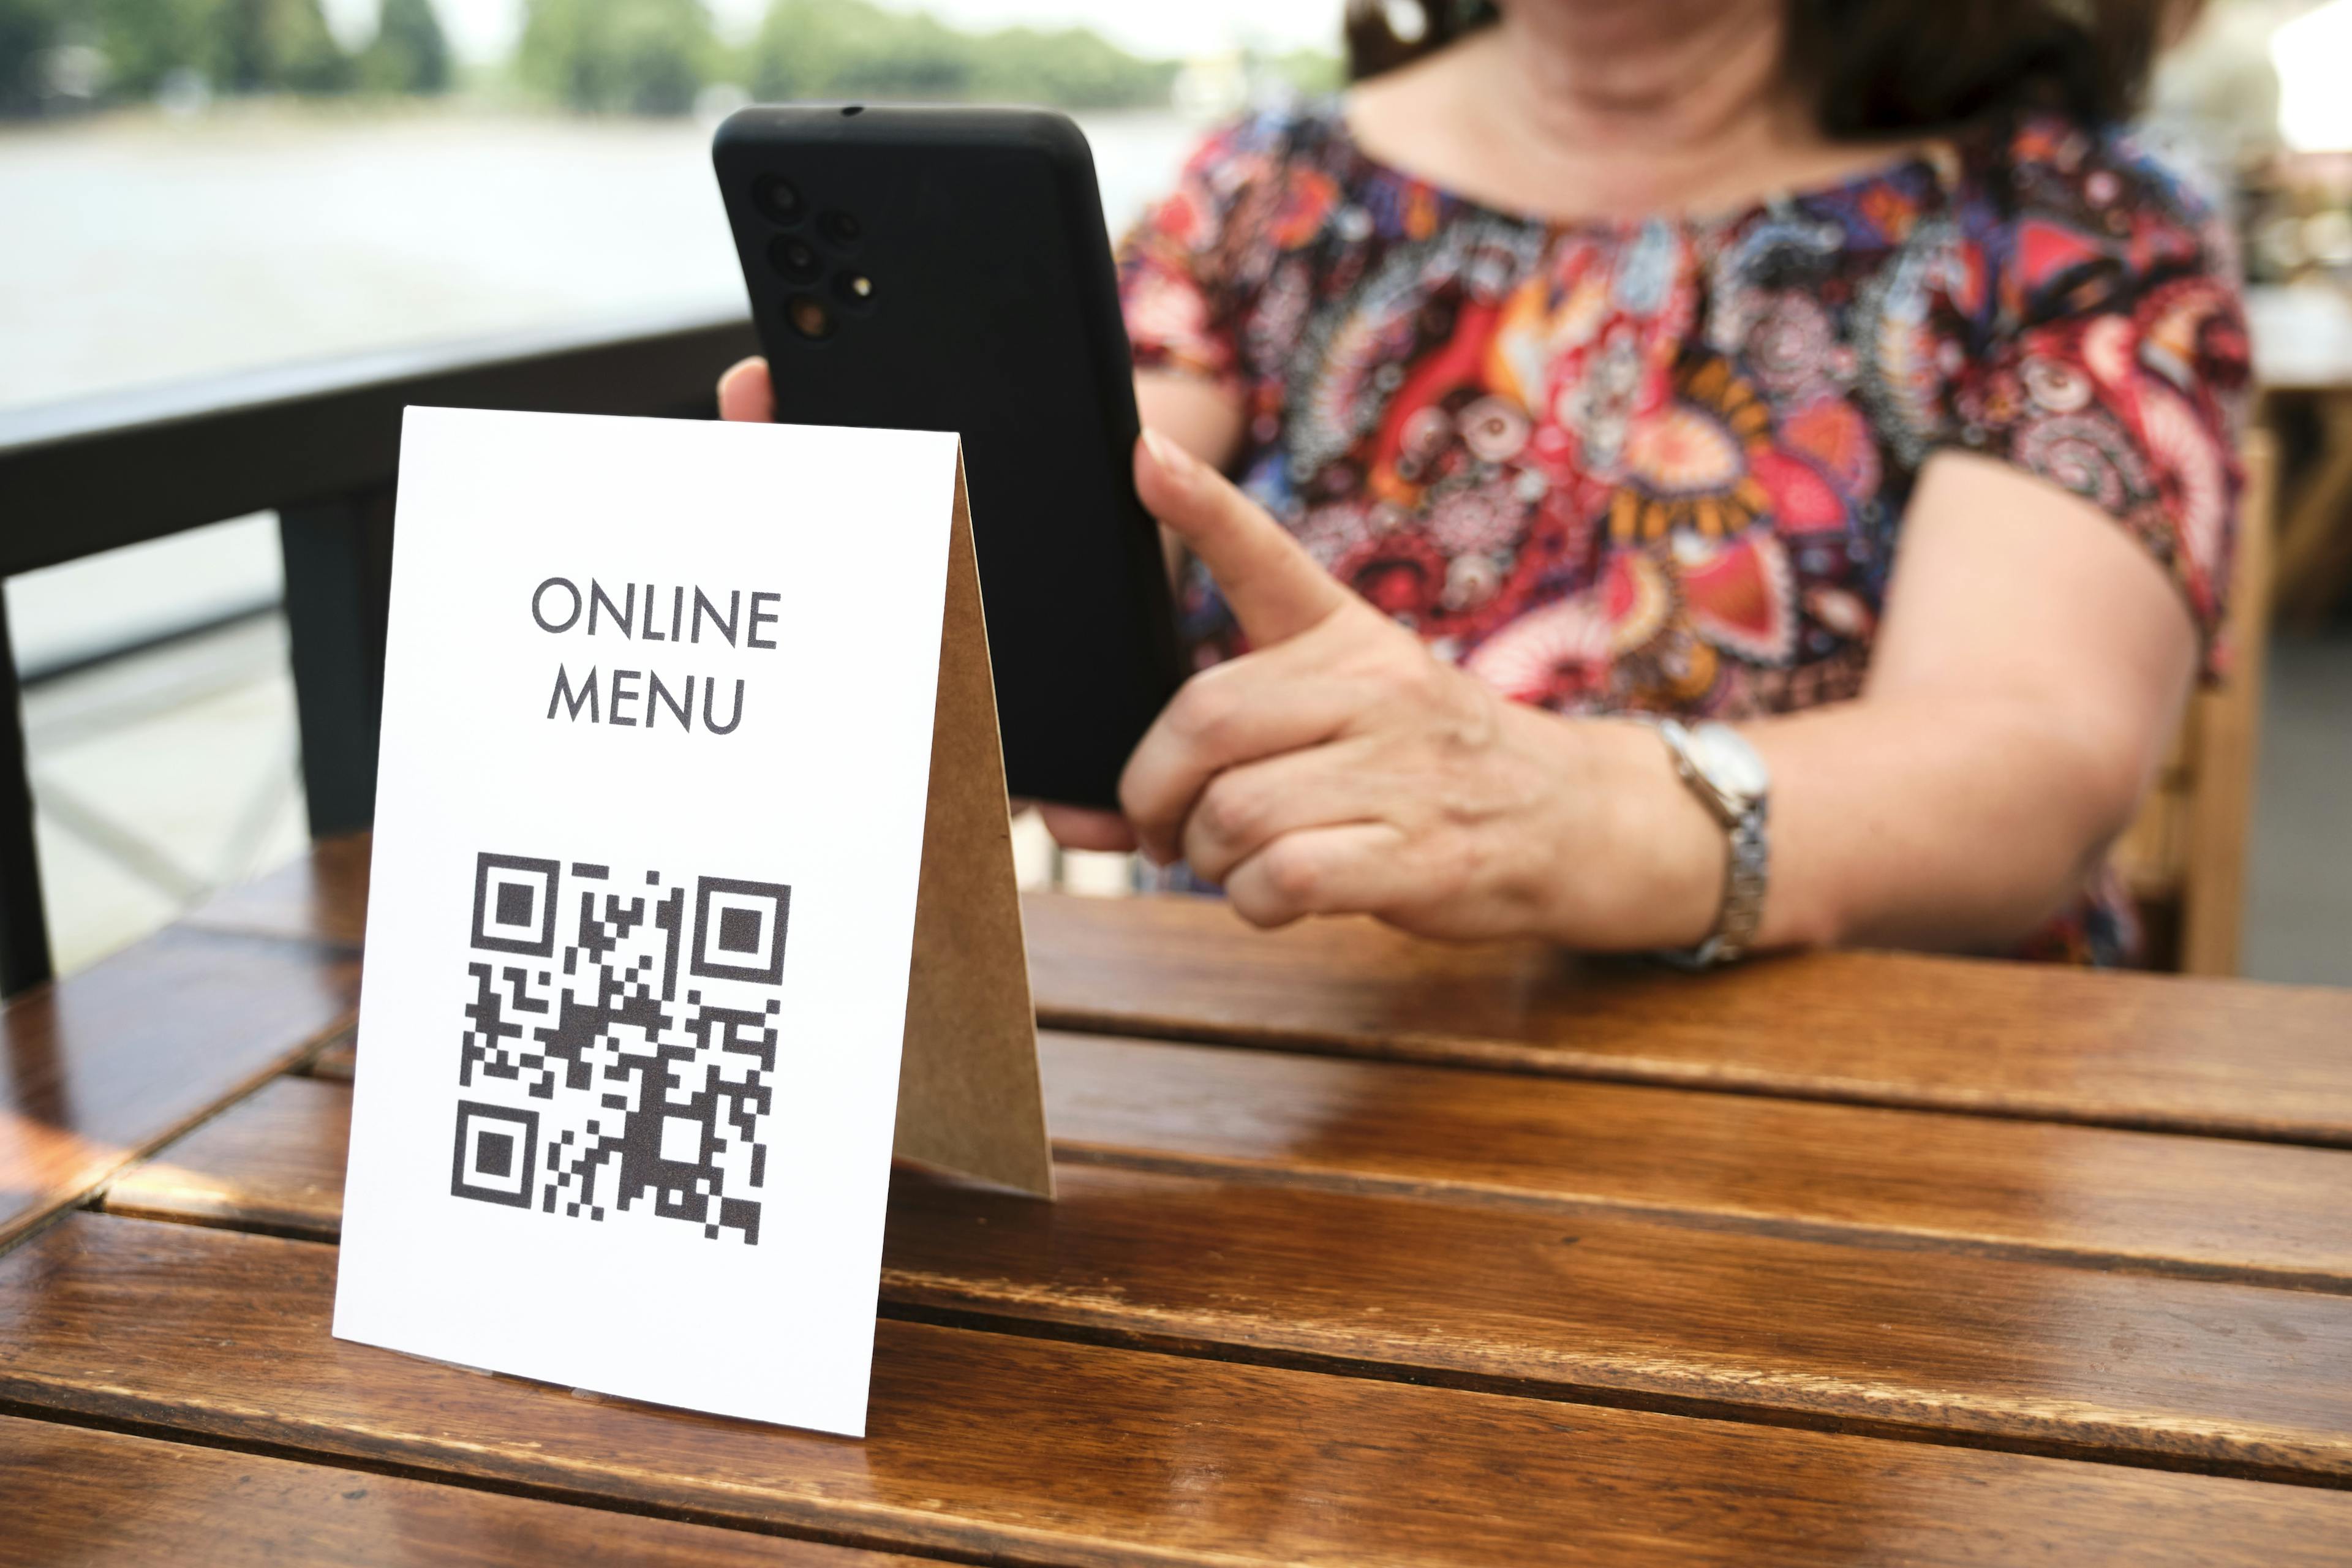 A woman sitting in a restaurant and scanning a QR code menu with her phone. The QR code redirects her to the menu.